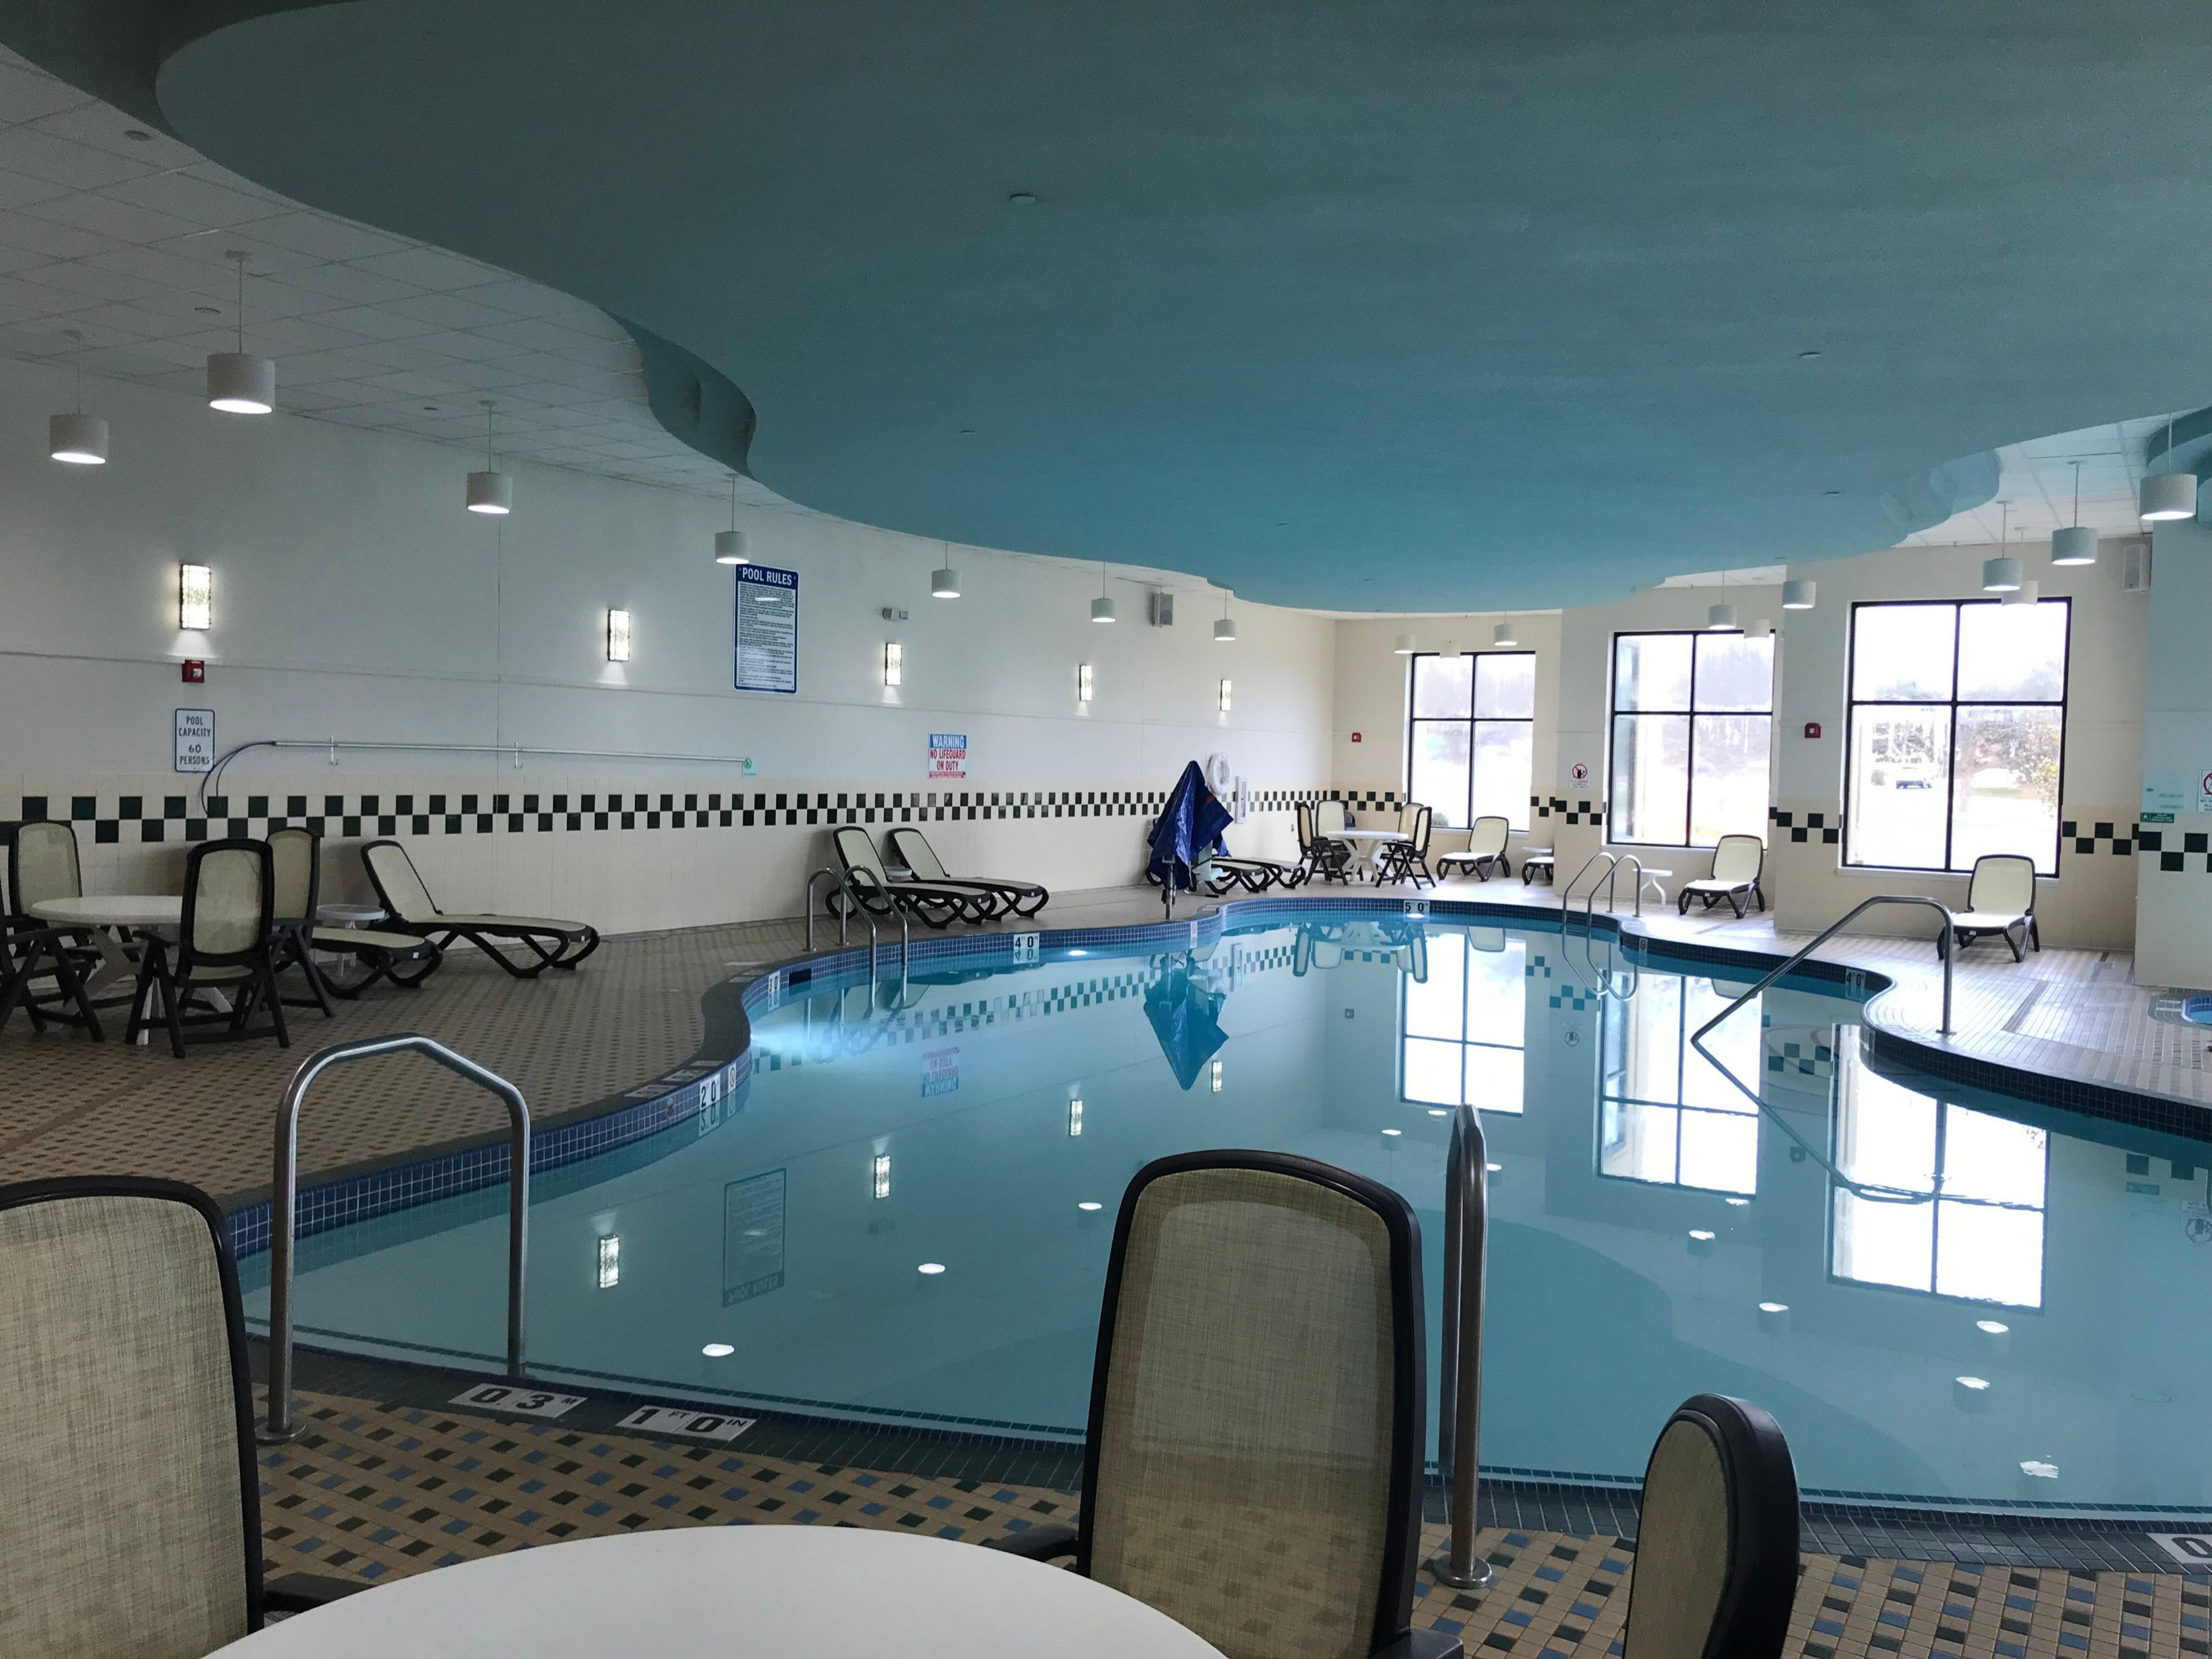 Our indoor swimming pool is a welcome oasis for relaxing, completing a work-out or splashing with the kids. Don't let the cold weather outside force you put away your swim suit. It can be Summer all year long in our pool.